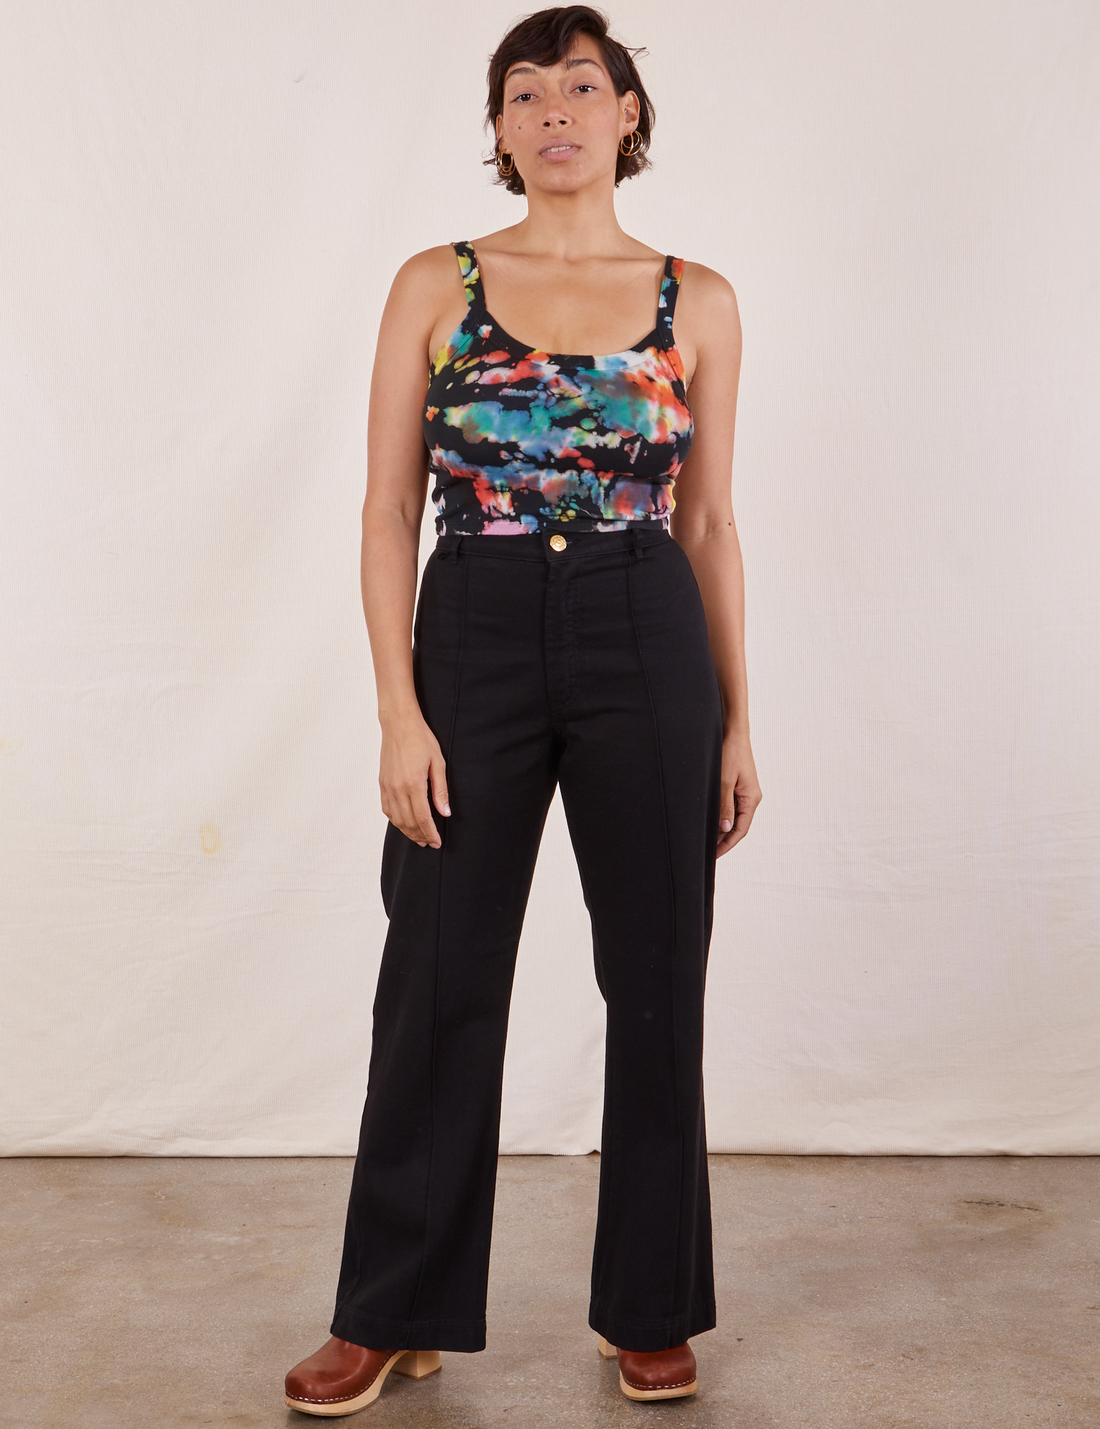 Tiara is wearing Cropped Cami in Rainbow Magic Waters and black Western Pants